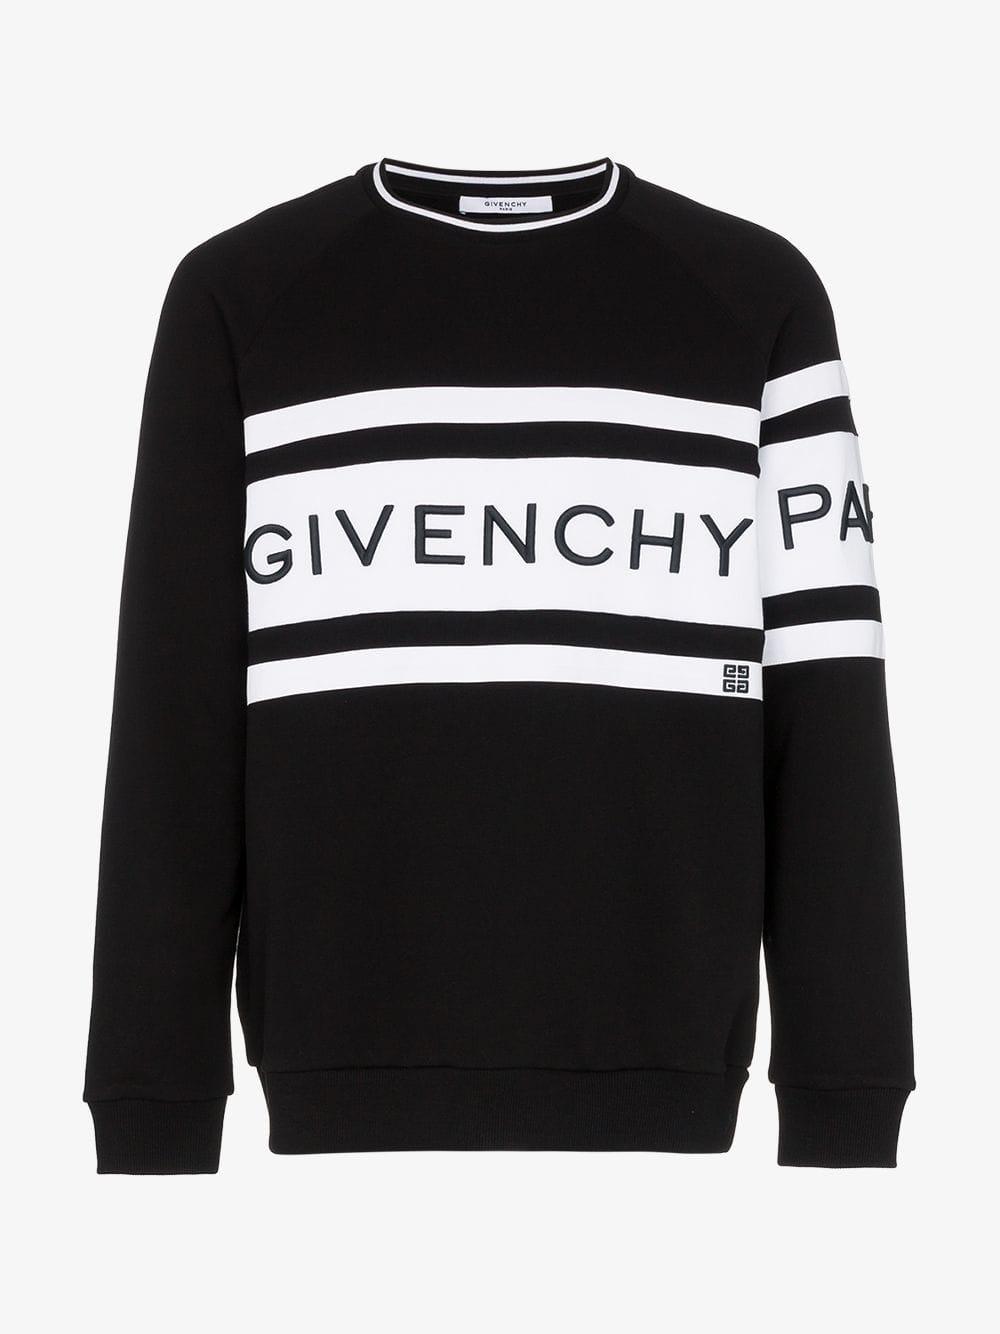 Givenchy Cotton Large Logo Crew Neck Sweater in Black for Men - Lyst